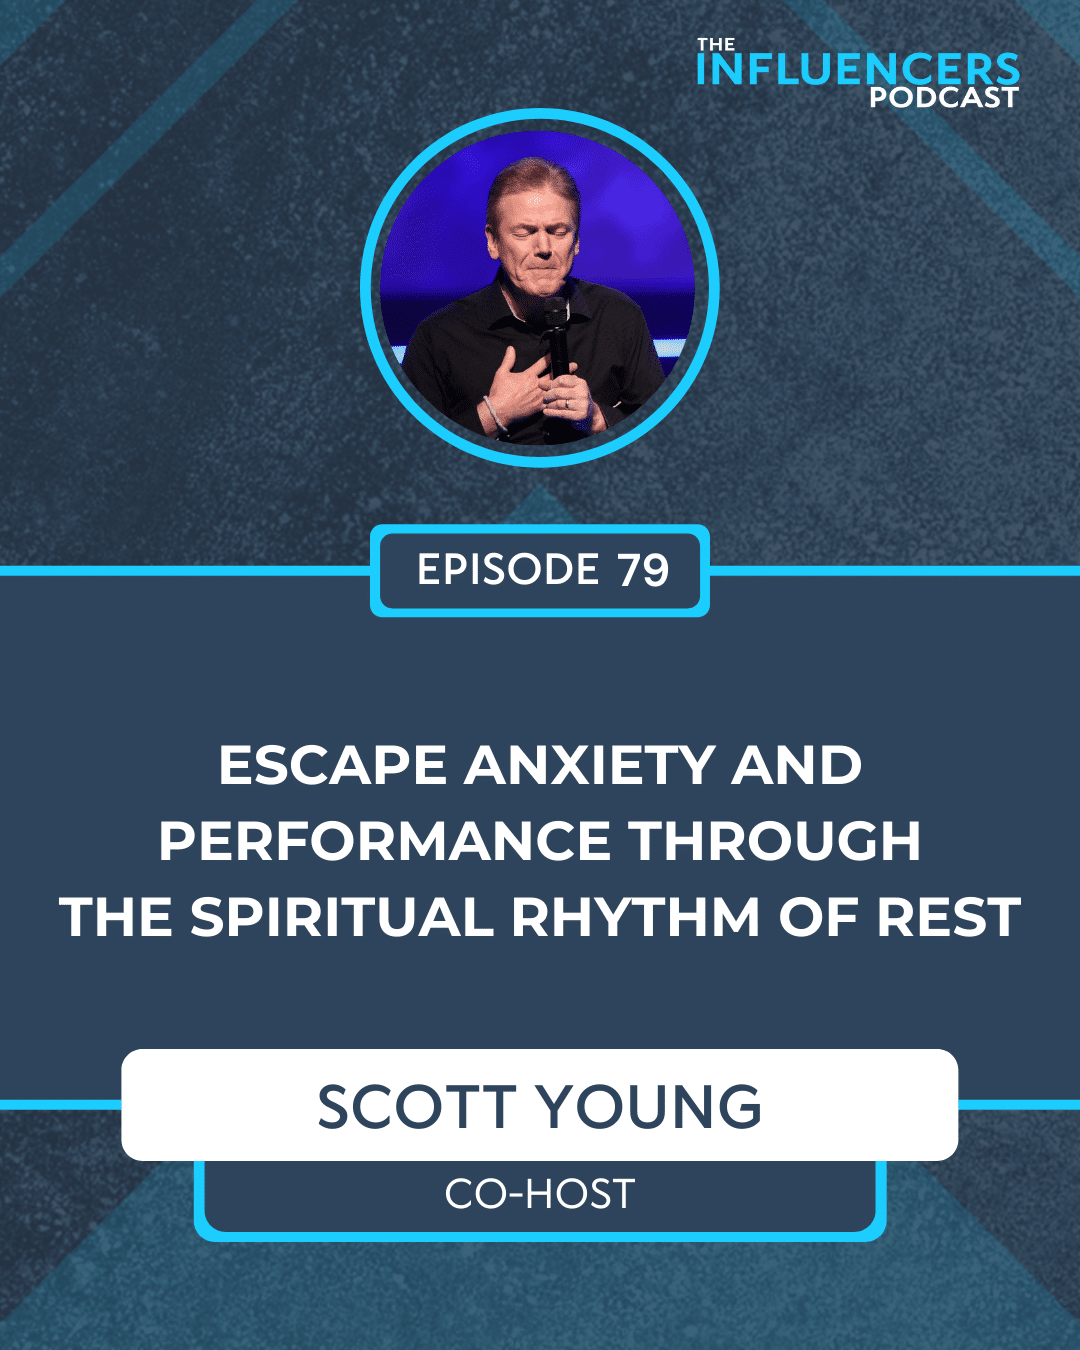 Episode 79 with Scott Young.